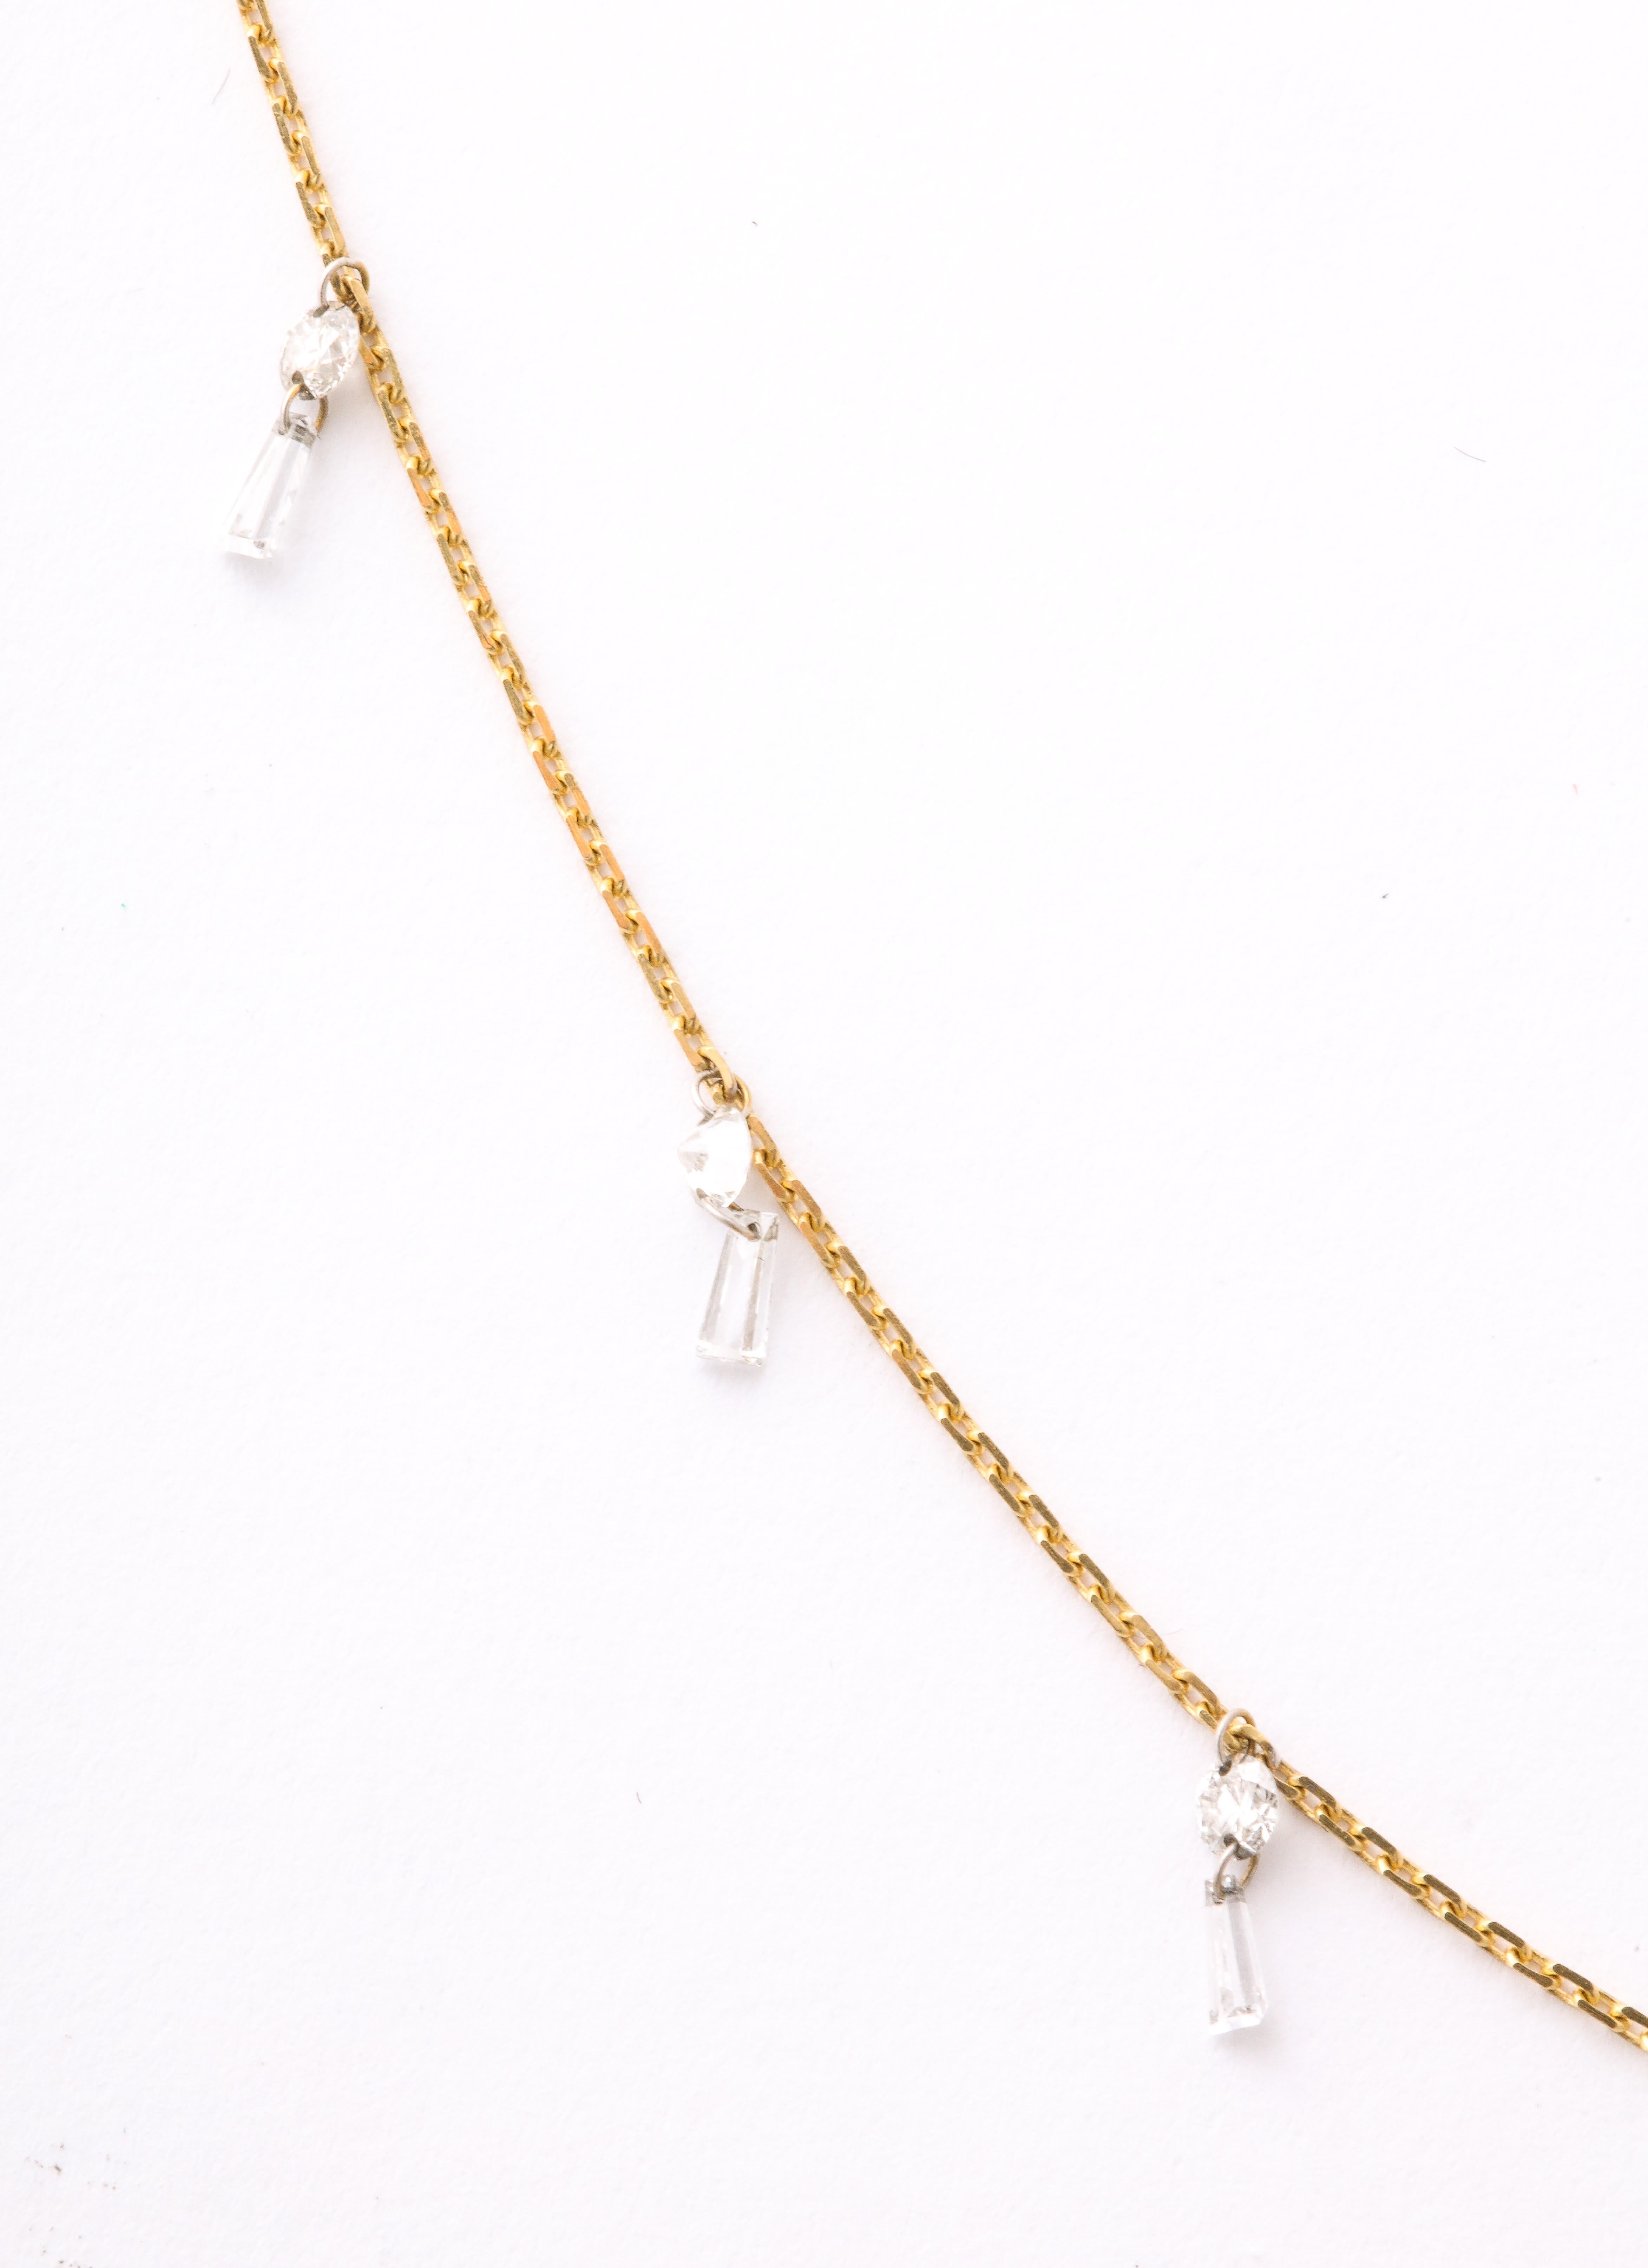 Dangling Diamond Baguette Necklace 18 Karat Gold In New Condition For Sale In New York, NY